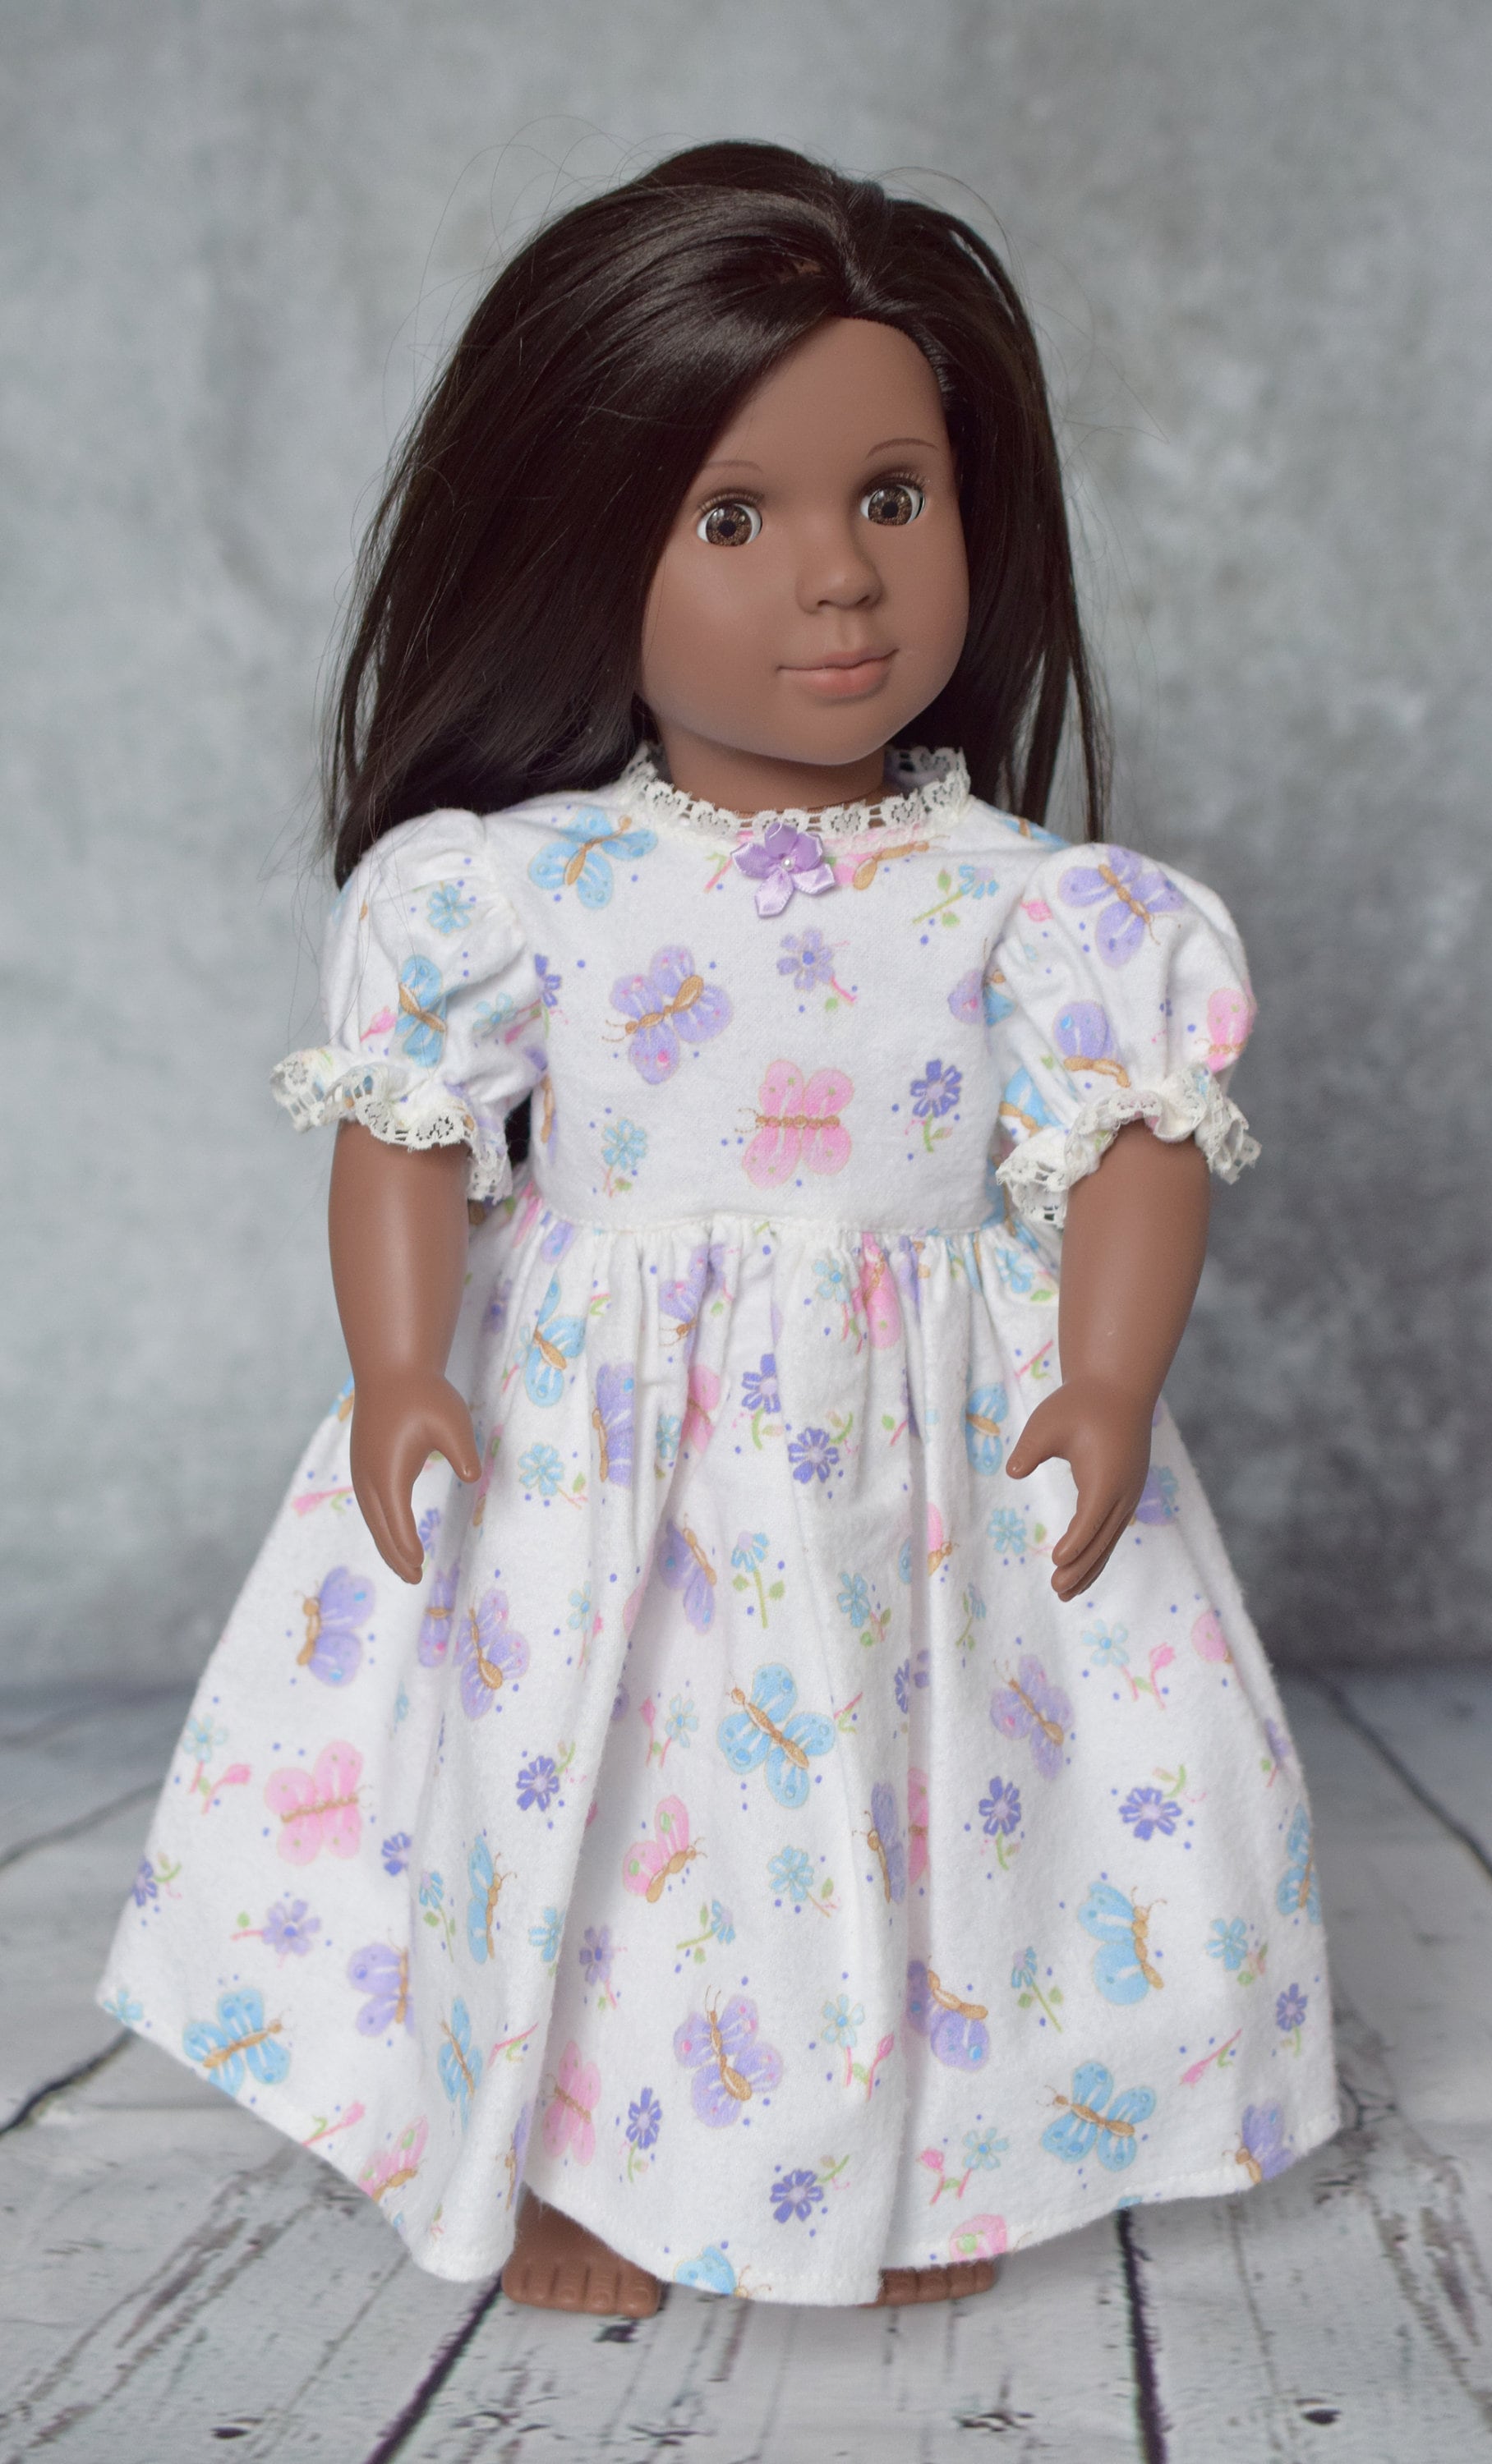 Cotton Flannel Nightgown, Long Nightgown, Quality Hand-made Doll ...